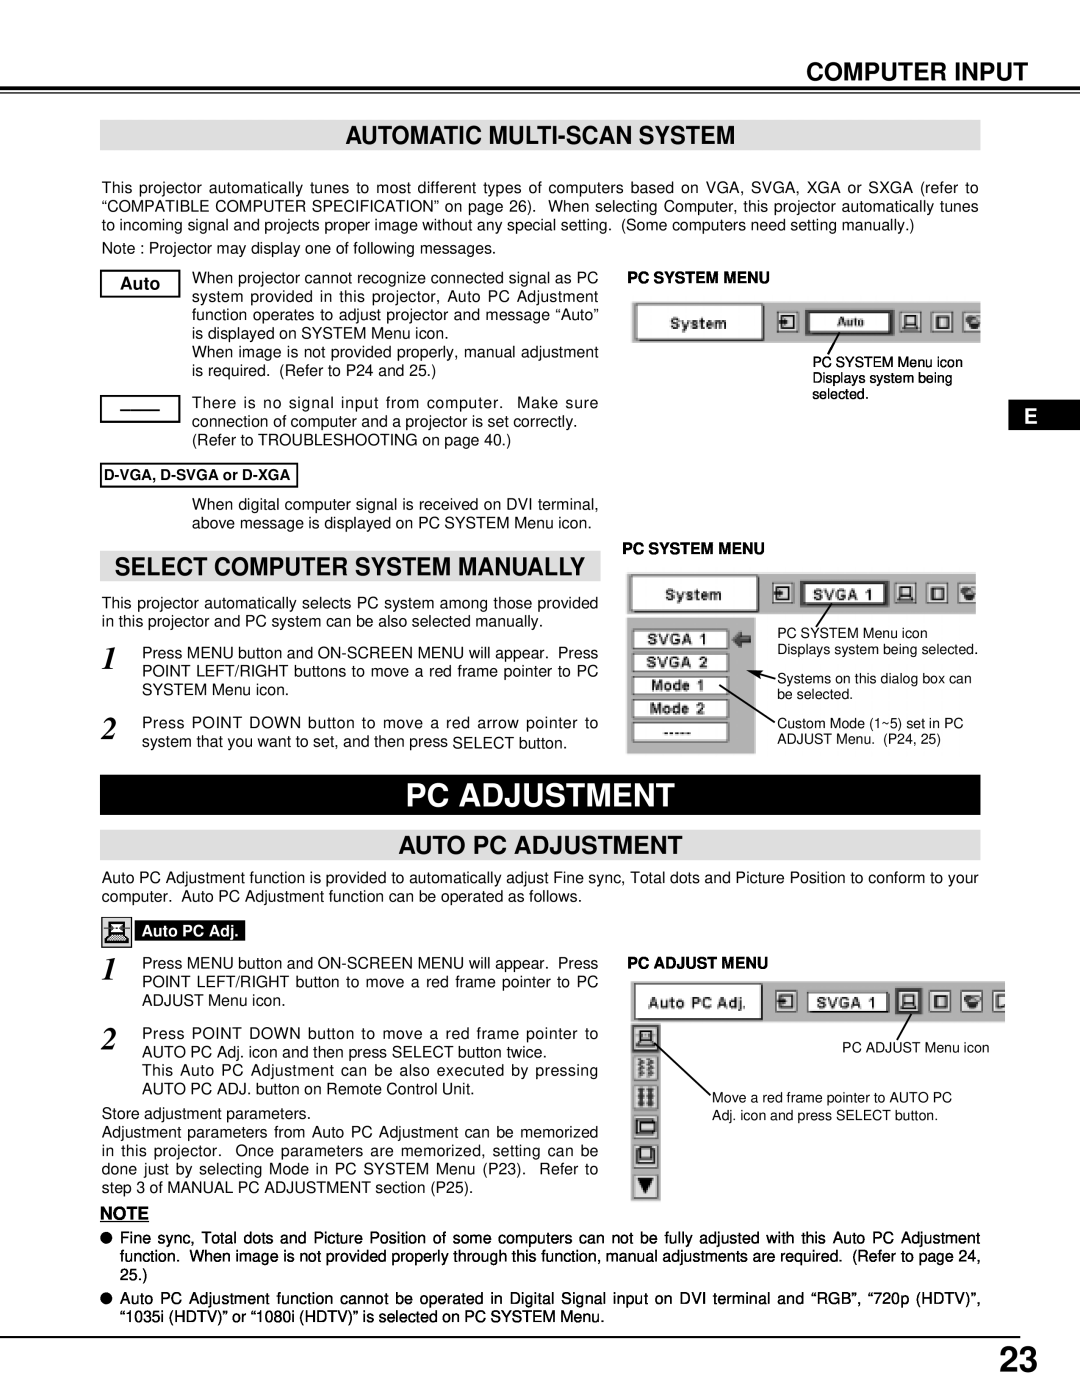 InFocus DP9295 manual Computer Input Automatic Multi-Scan System, Auto Pc Adjustment, Select Computer System Manually 